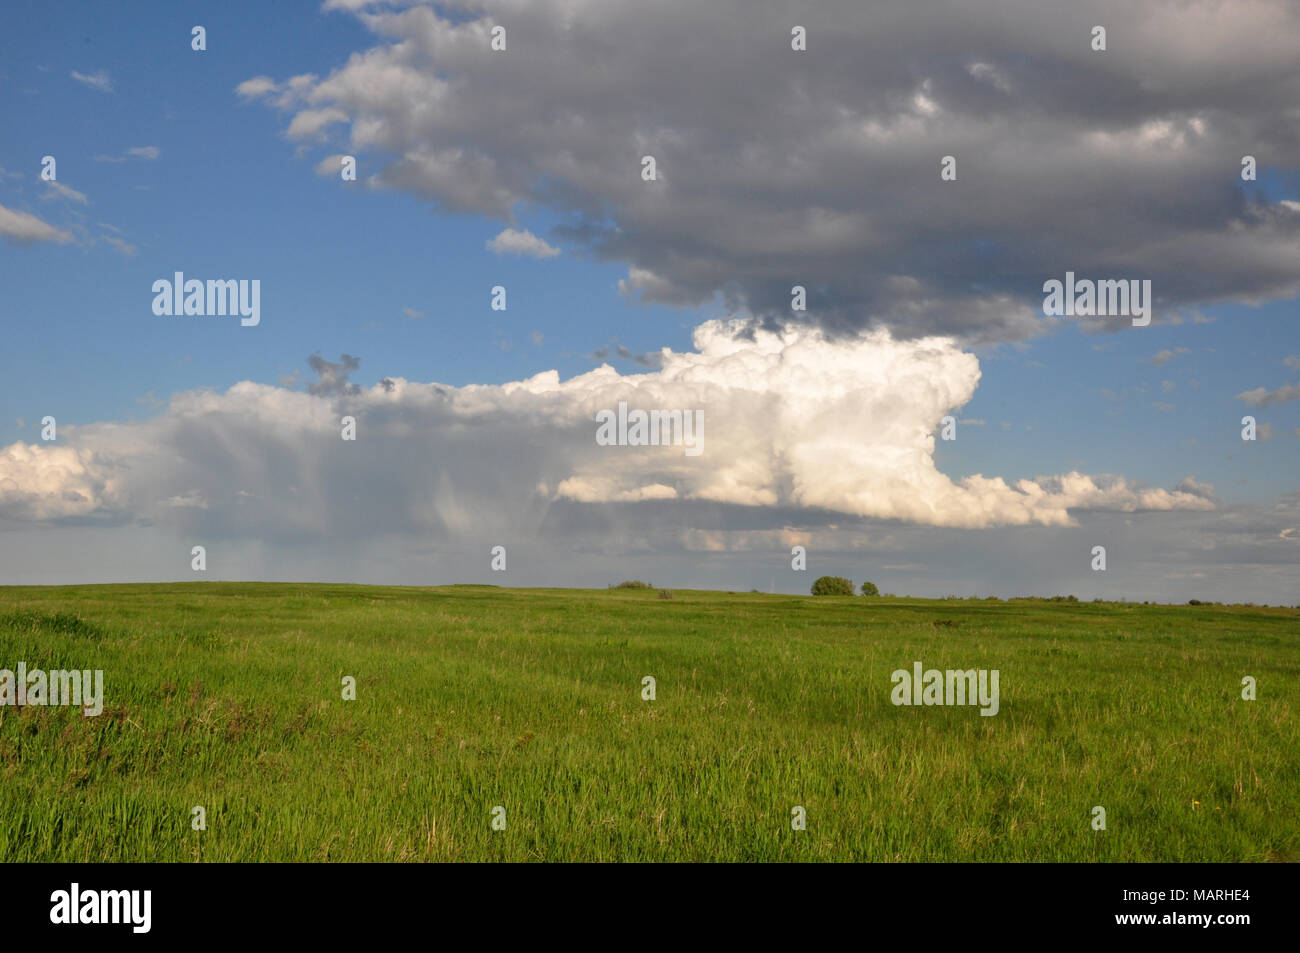 White Fluffy Cloud in a Bright Blue Sky over the Lush Green Grasses of Nose Hill Park in Calgary, Alberta. Stock Photo